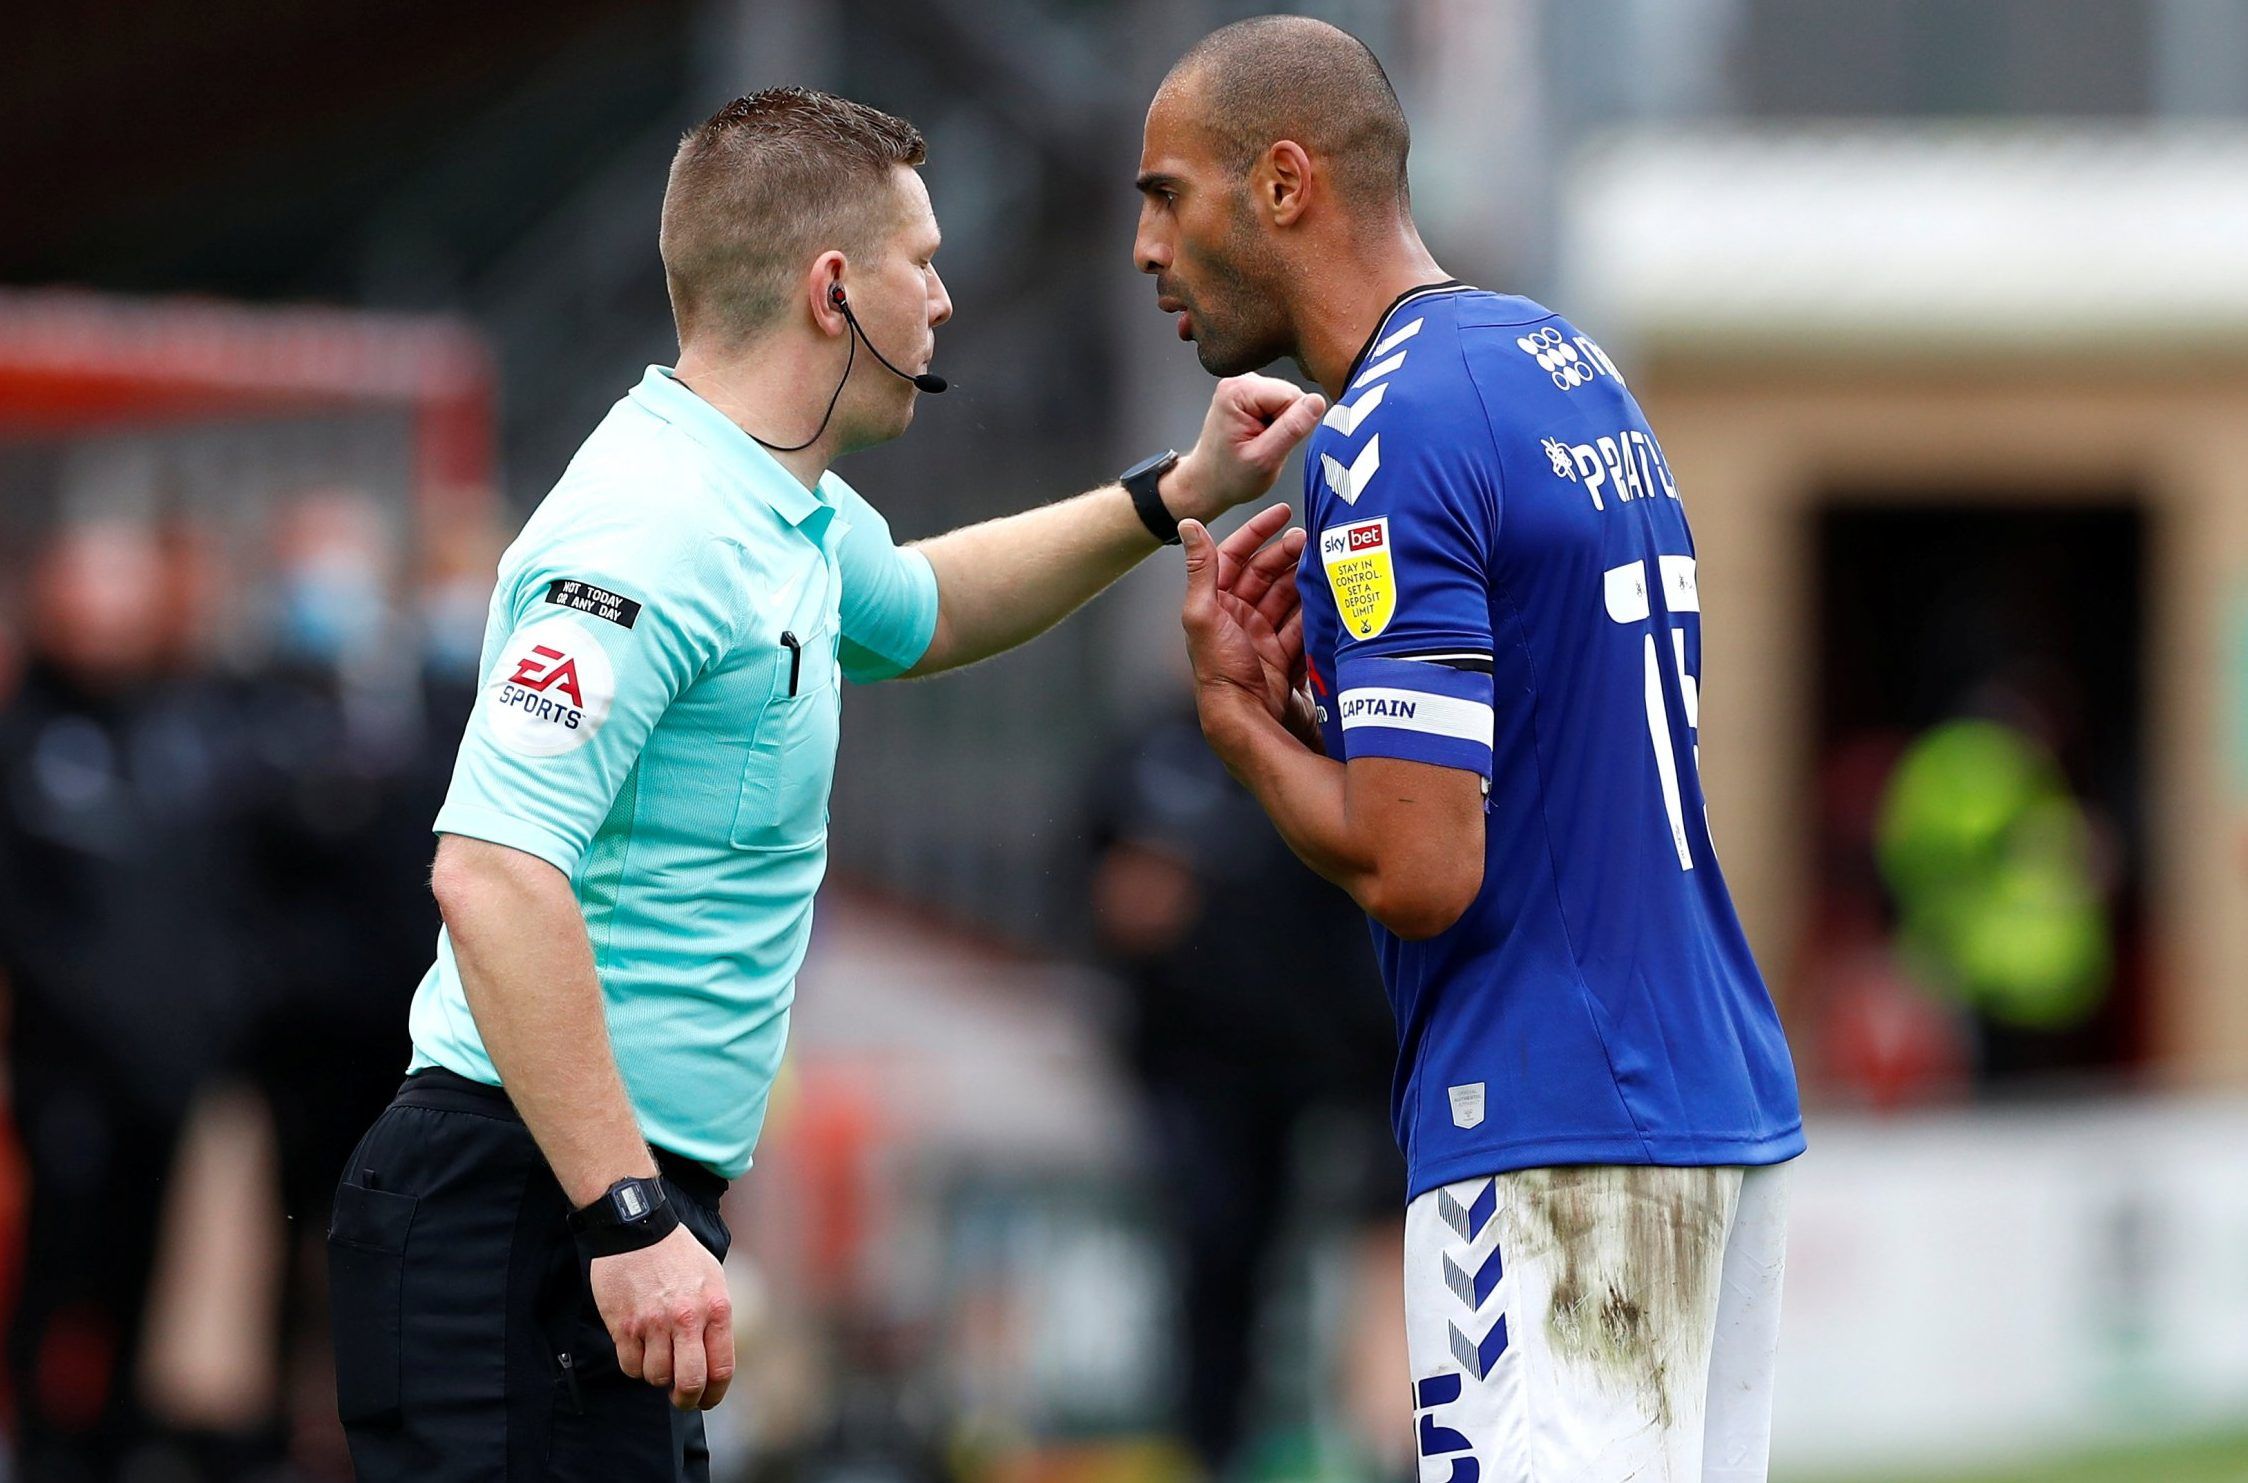 charlton athletic midfielder darren pratley remonstrates with referee during lincoln city game league one